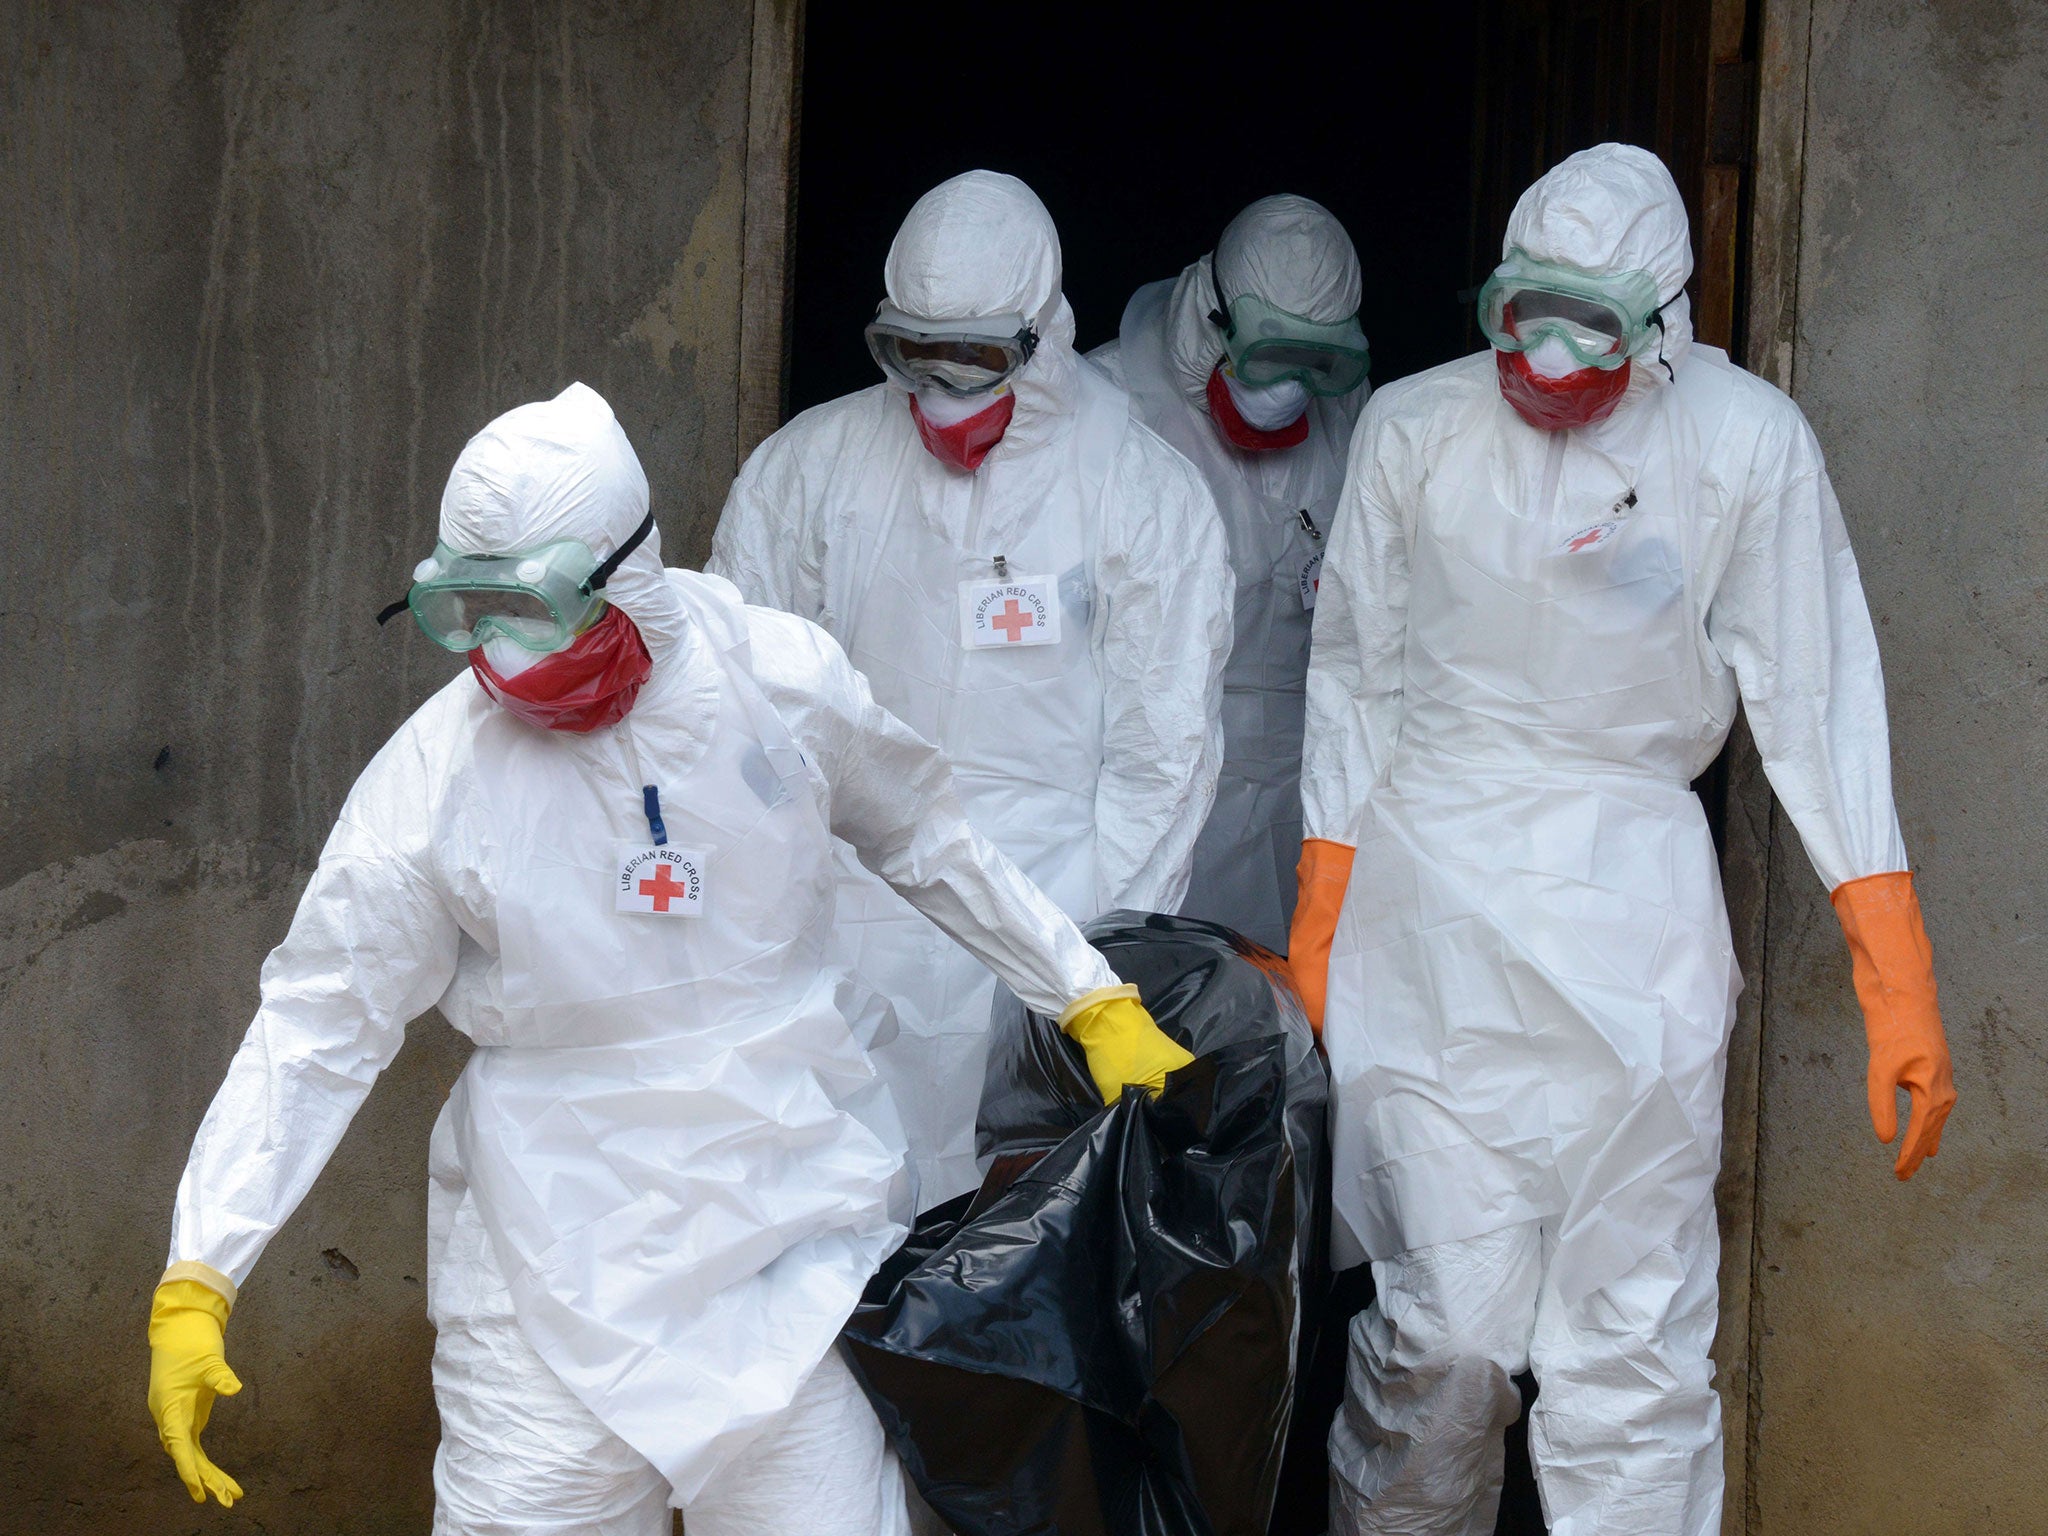 Medical workers of the Liberian Red Cross, wearing a protective suit, carry the body of a victim of the Ebola virus in a bag in Monrovia